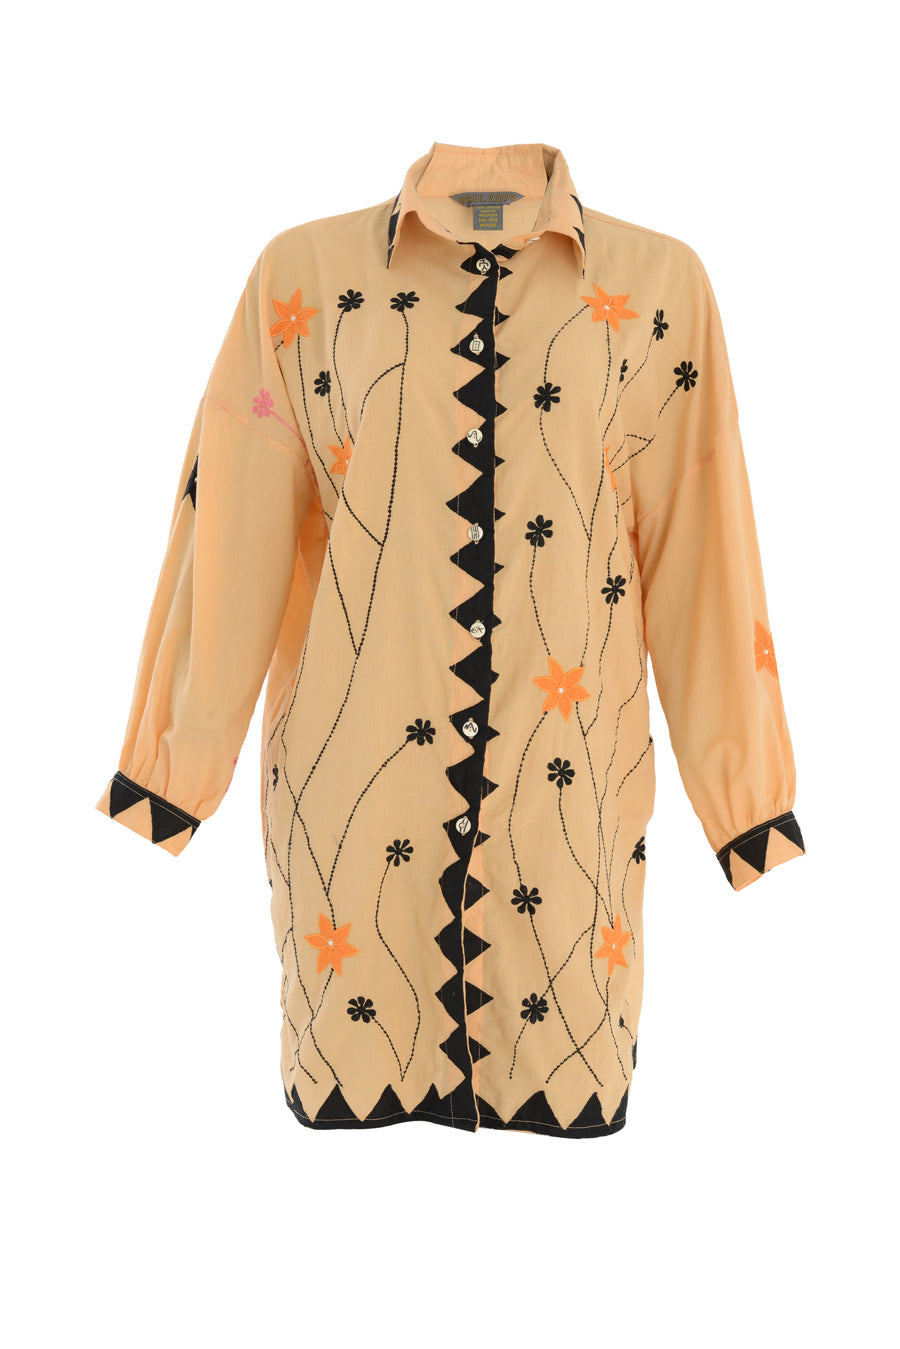 Aleandra - Cotton Voile Applique Long Shirt With Hand Carved Bone Buttons (7356283027652)